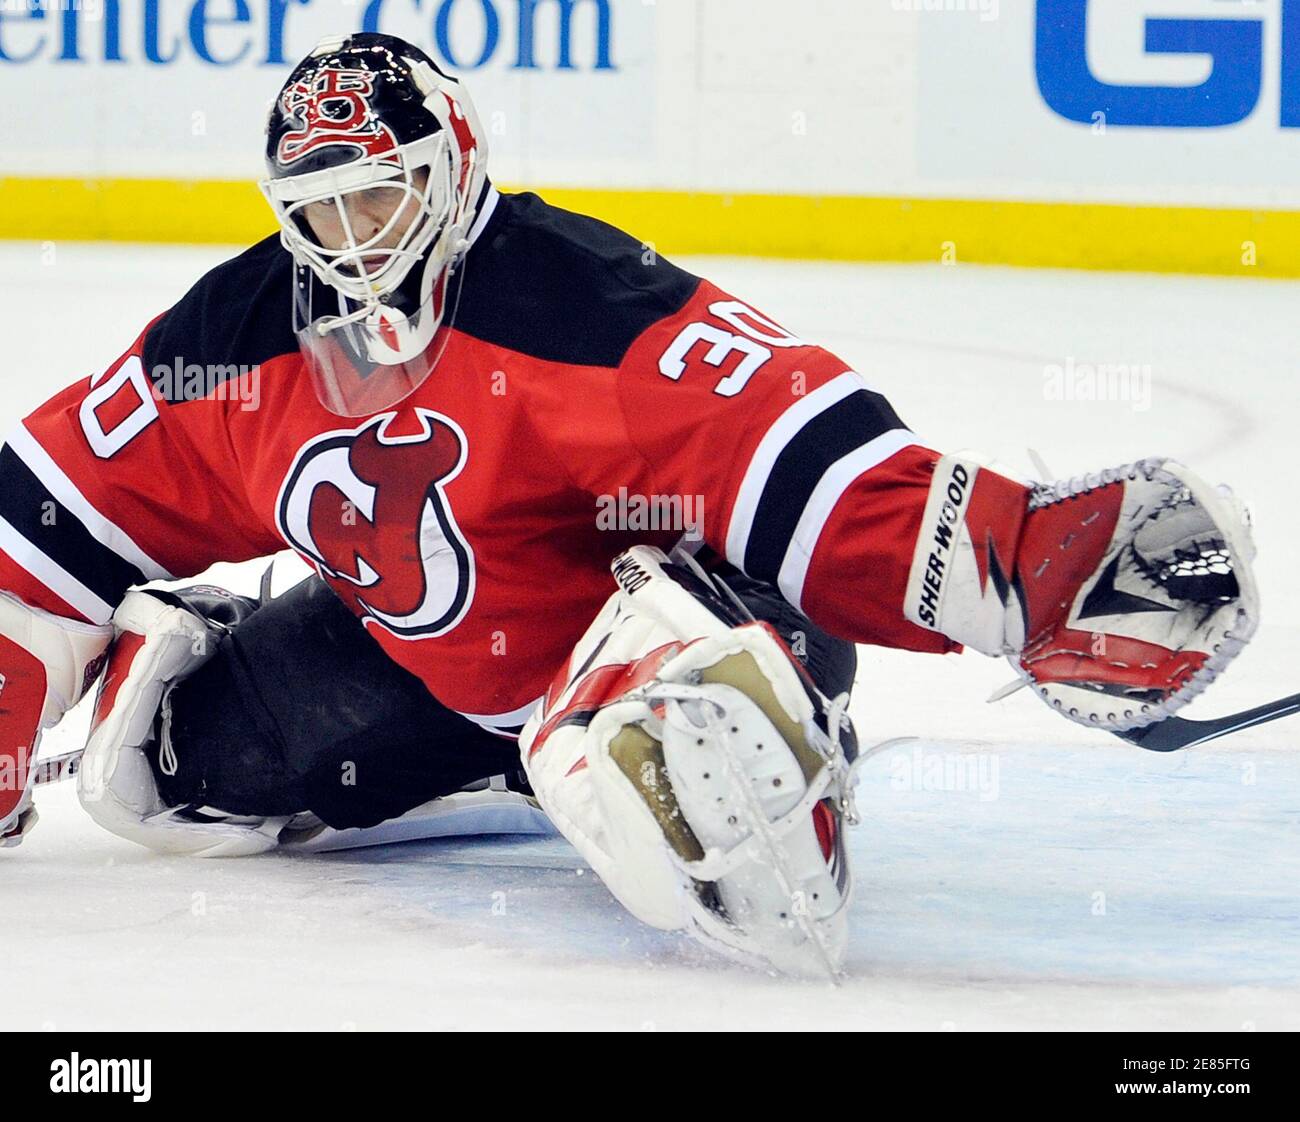 New Jersey Devils goalie Martin Brodeur makes a glove save against the  Chicago Black Hawks in the third period of their NHL hockey game in Newark, New  Jersey April 2, 2010. REUTERS/Ray